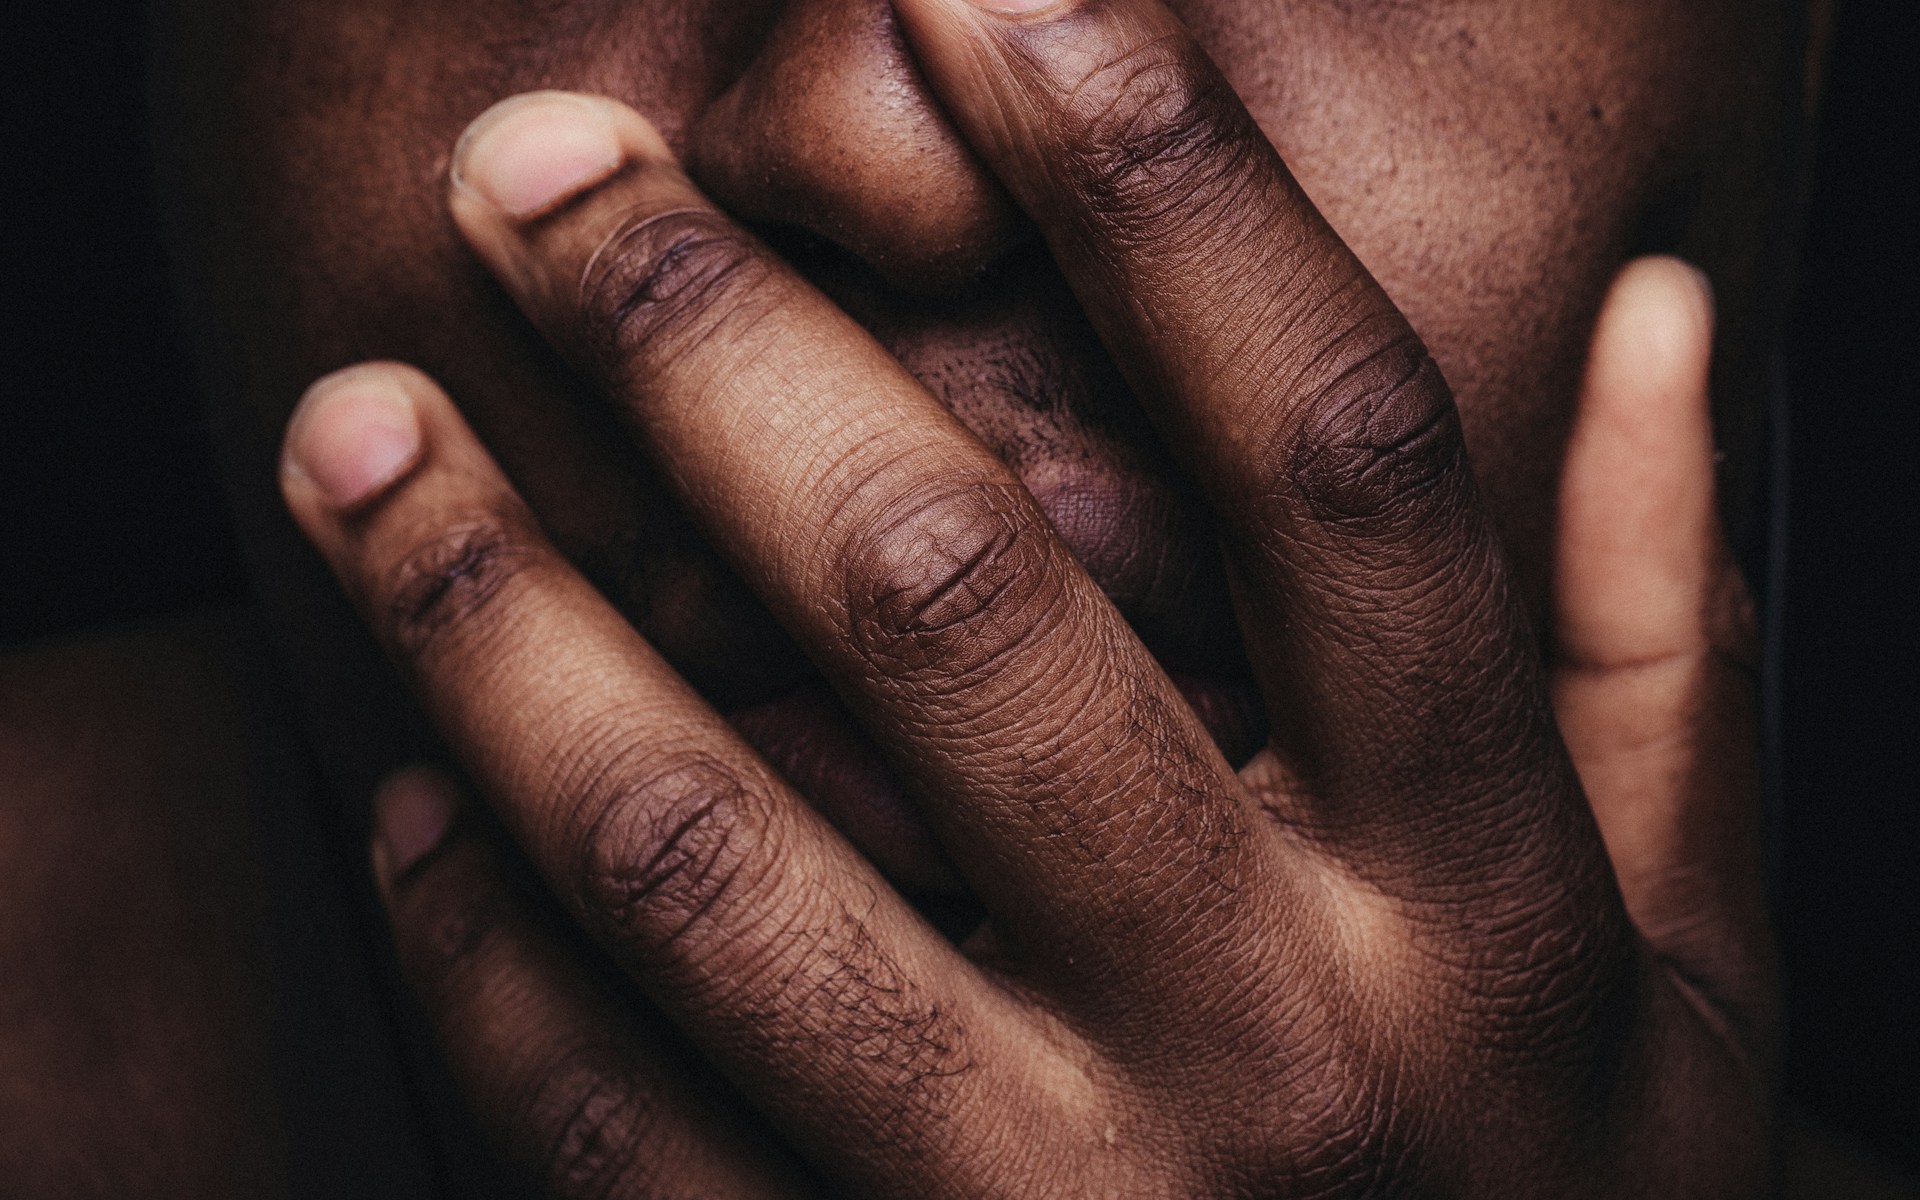 a closeup of a man's hand covering his face